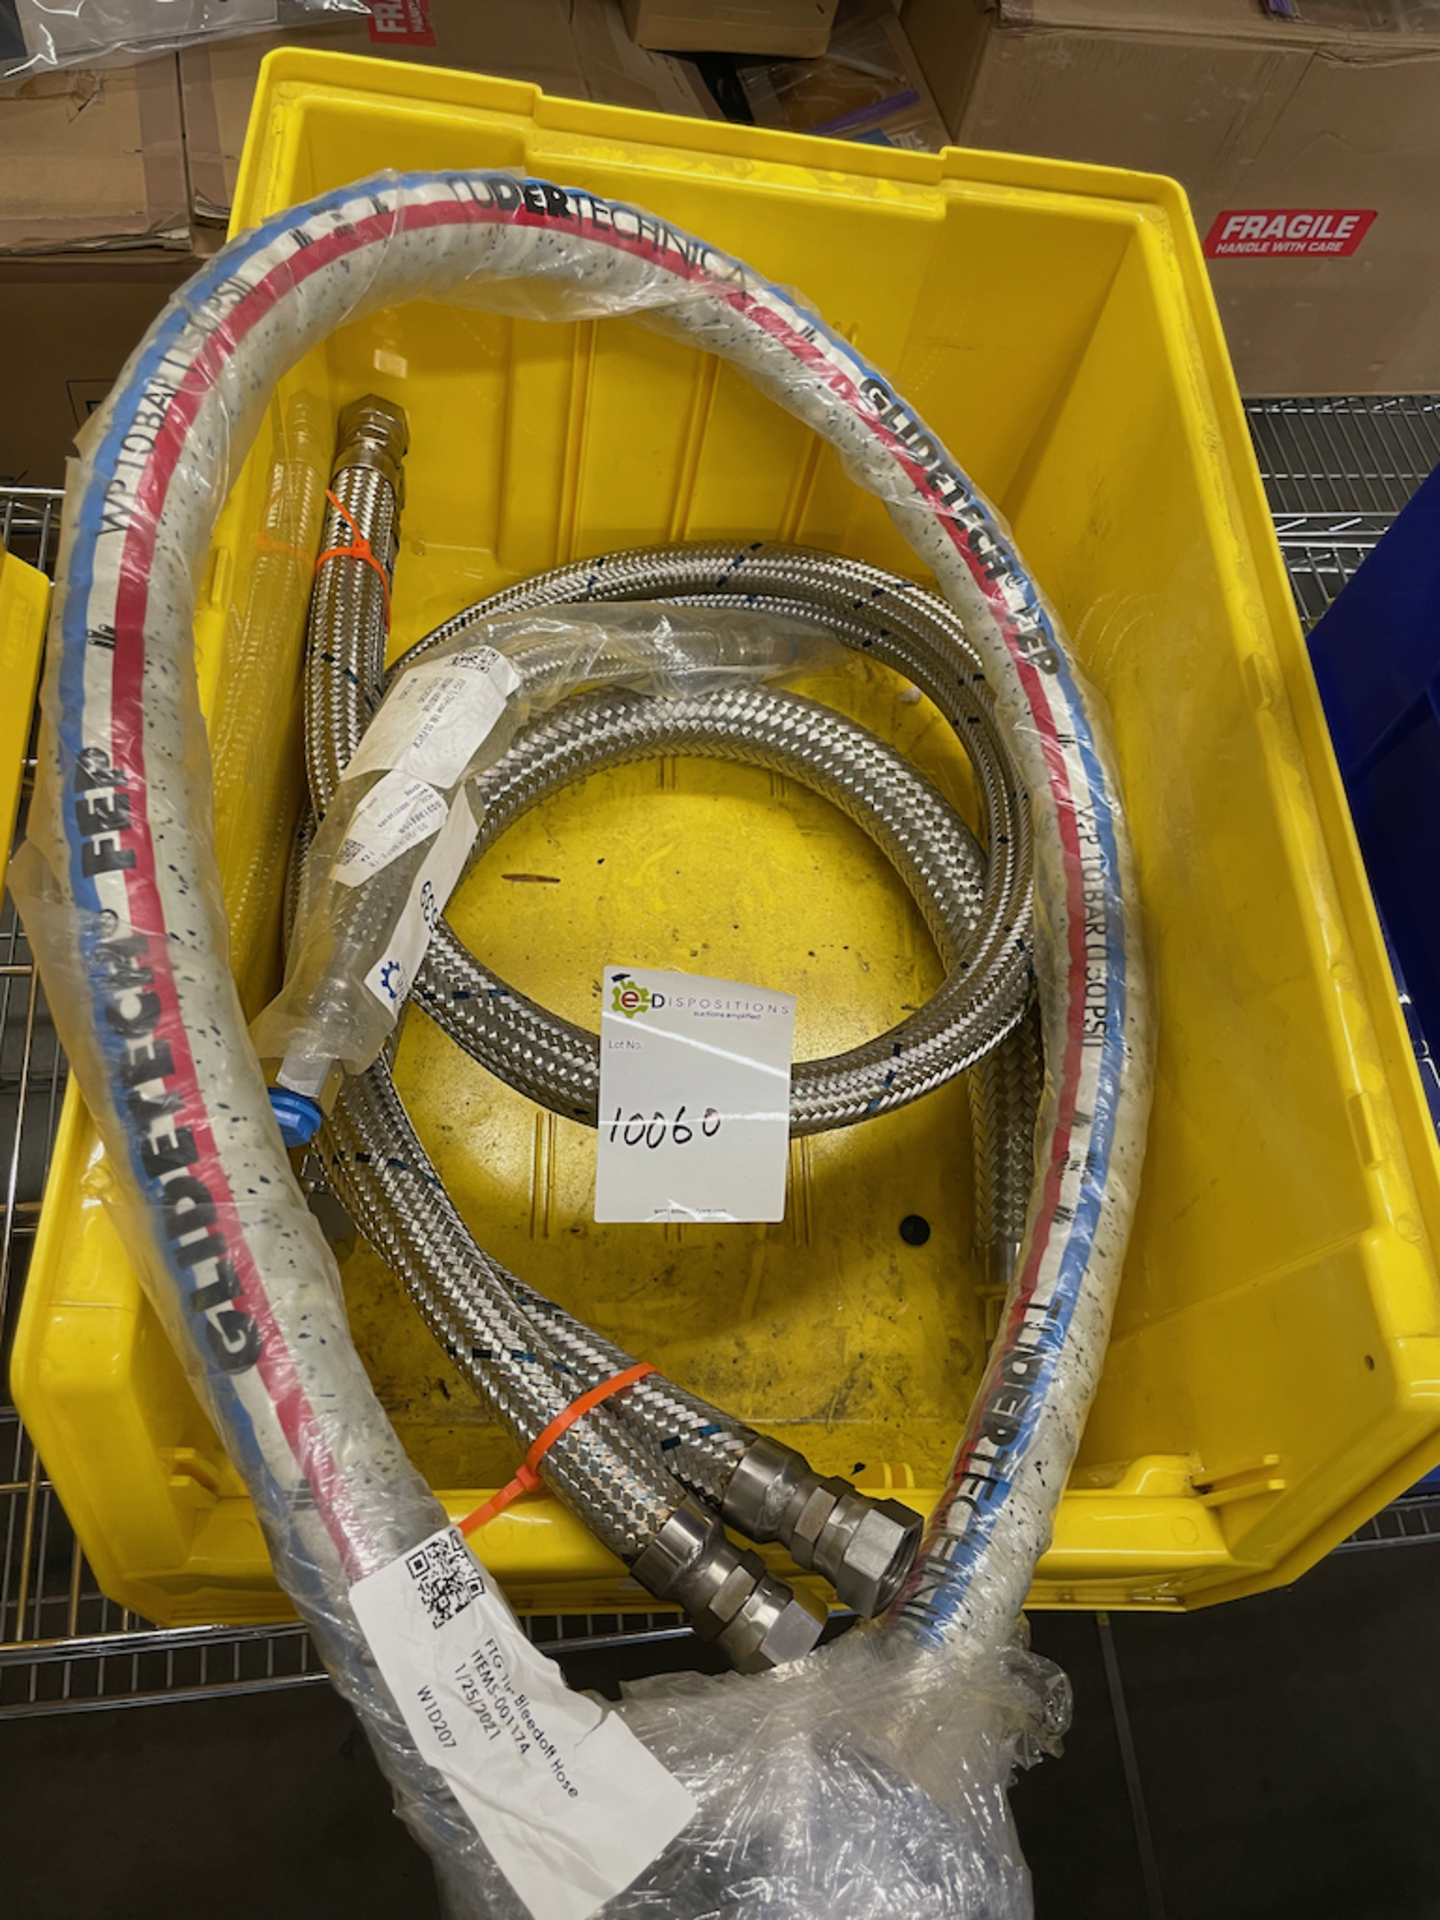 LOT CONSISTING OF QTY-4 SECTIONS OF BRAIDED WIRE TUBES | CABLES, 2 ~5' SECTIONS & 1- 2' SECTION - - Image 4 of 4